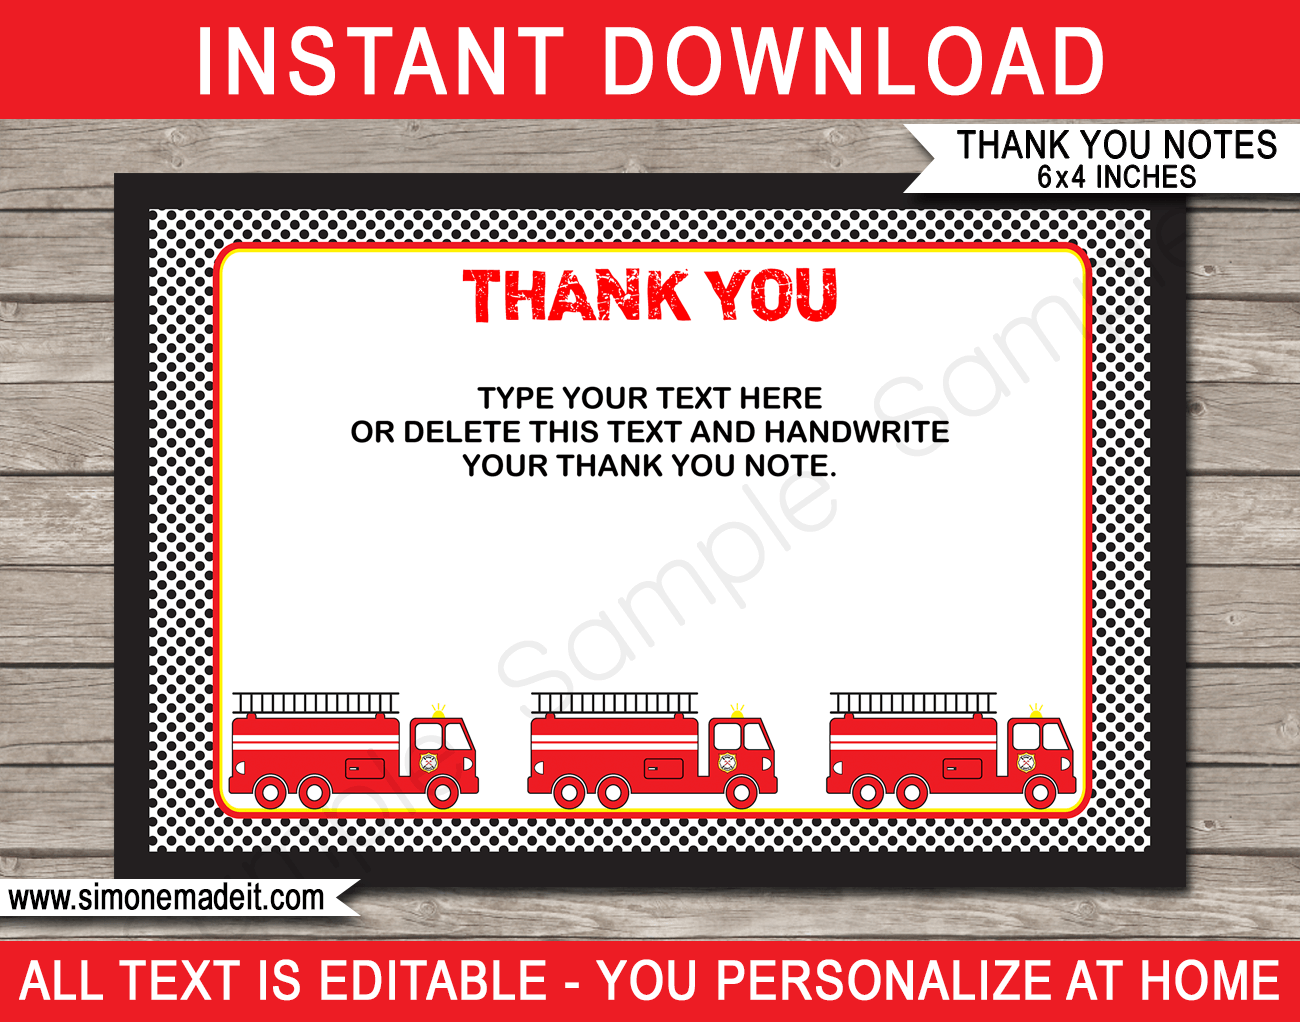 Printable Fireman Party Thank You Cards - Favor Tags - Fireman Birthday Party theme - Firetruck - Editable Template - Instant Download via simonemadeit.com